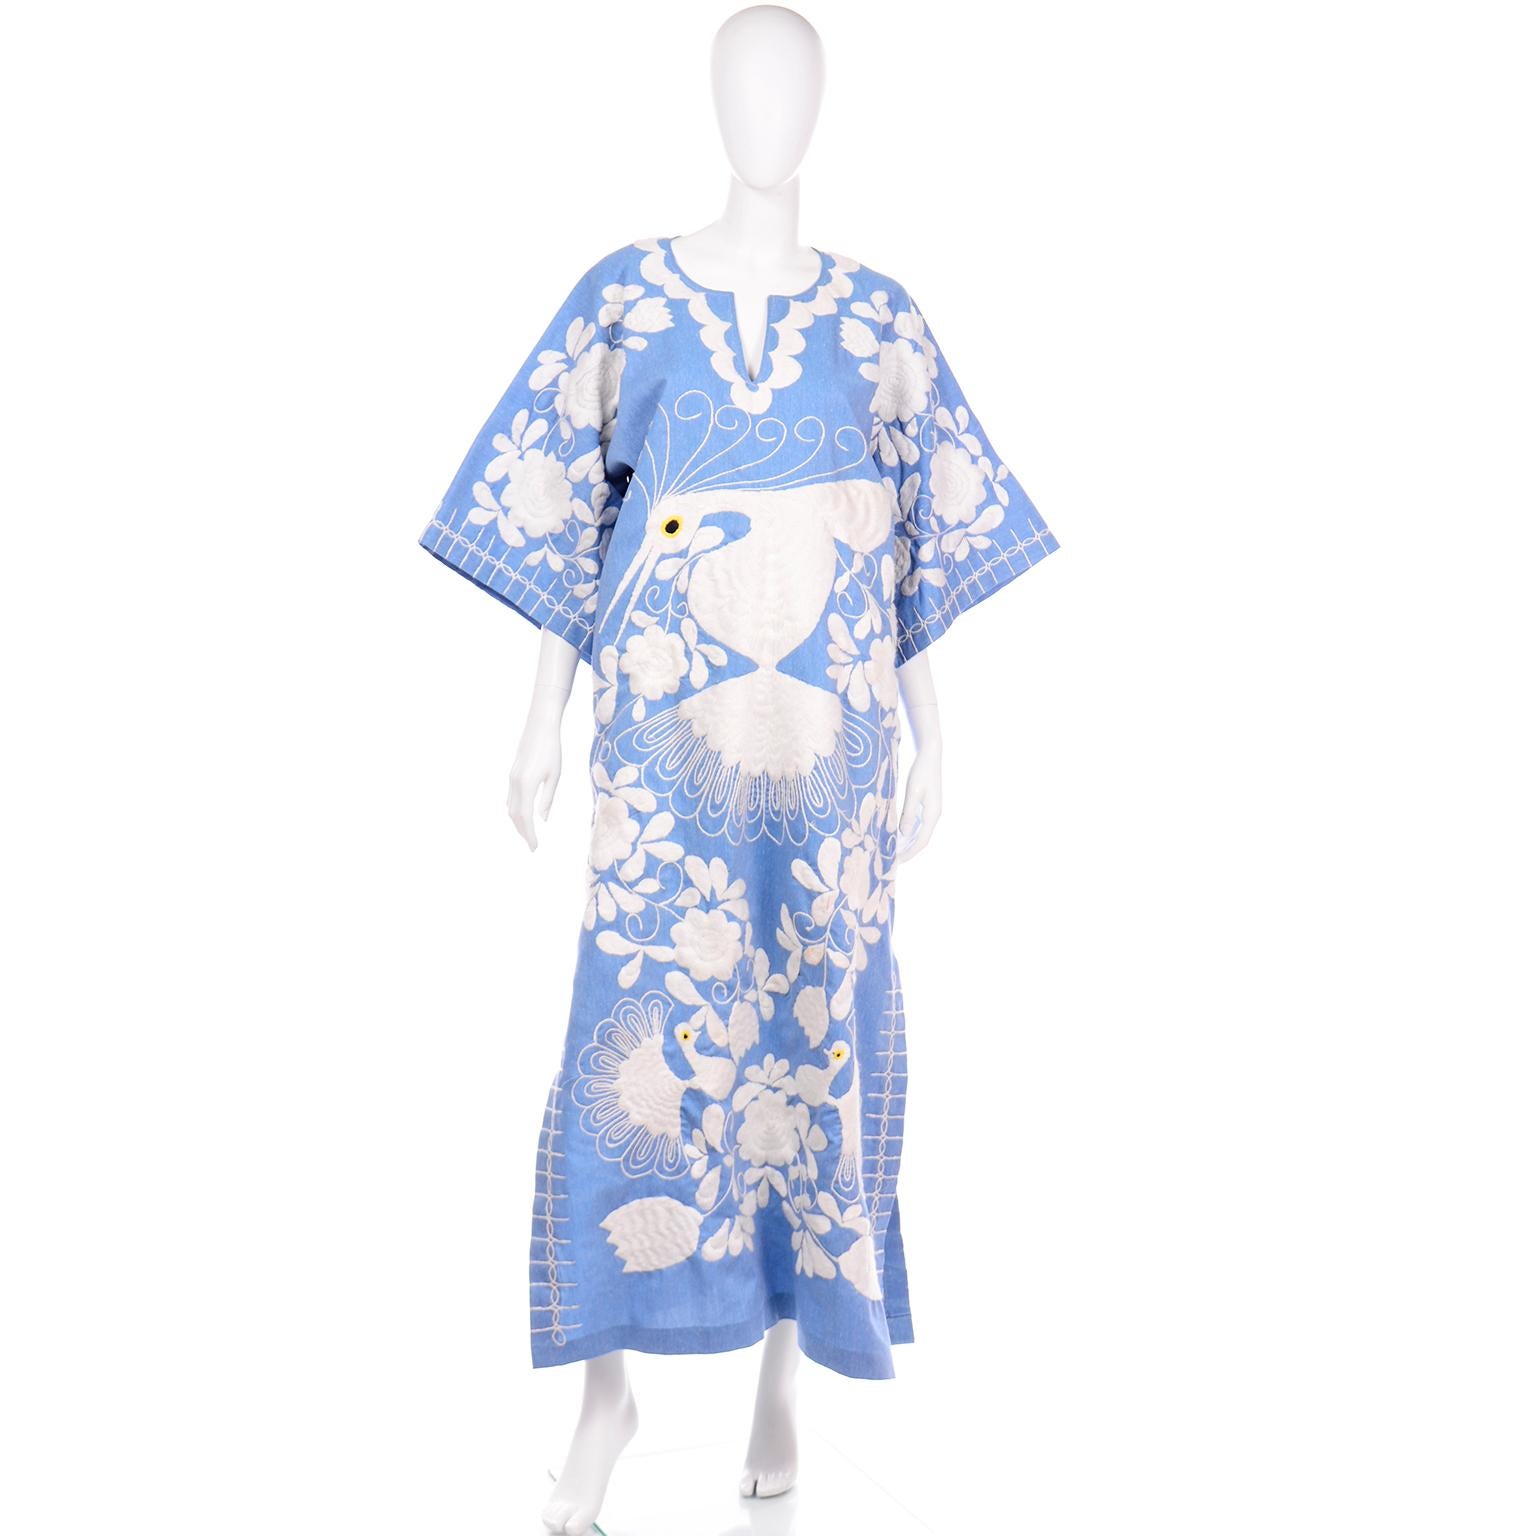 This is a spectacular hand embroidered vintage blue caftan dress with a floral and bird motif. This incredible dress has thick white embroidery and the bird in the center has a yellow and black eye. The sleeves are bell shaped the dress can fit a